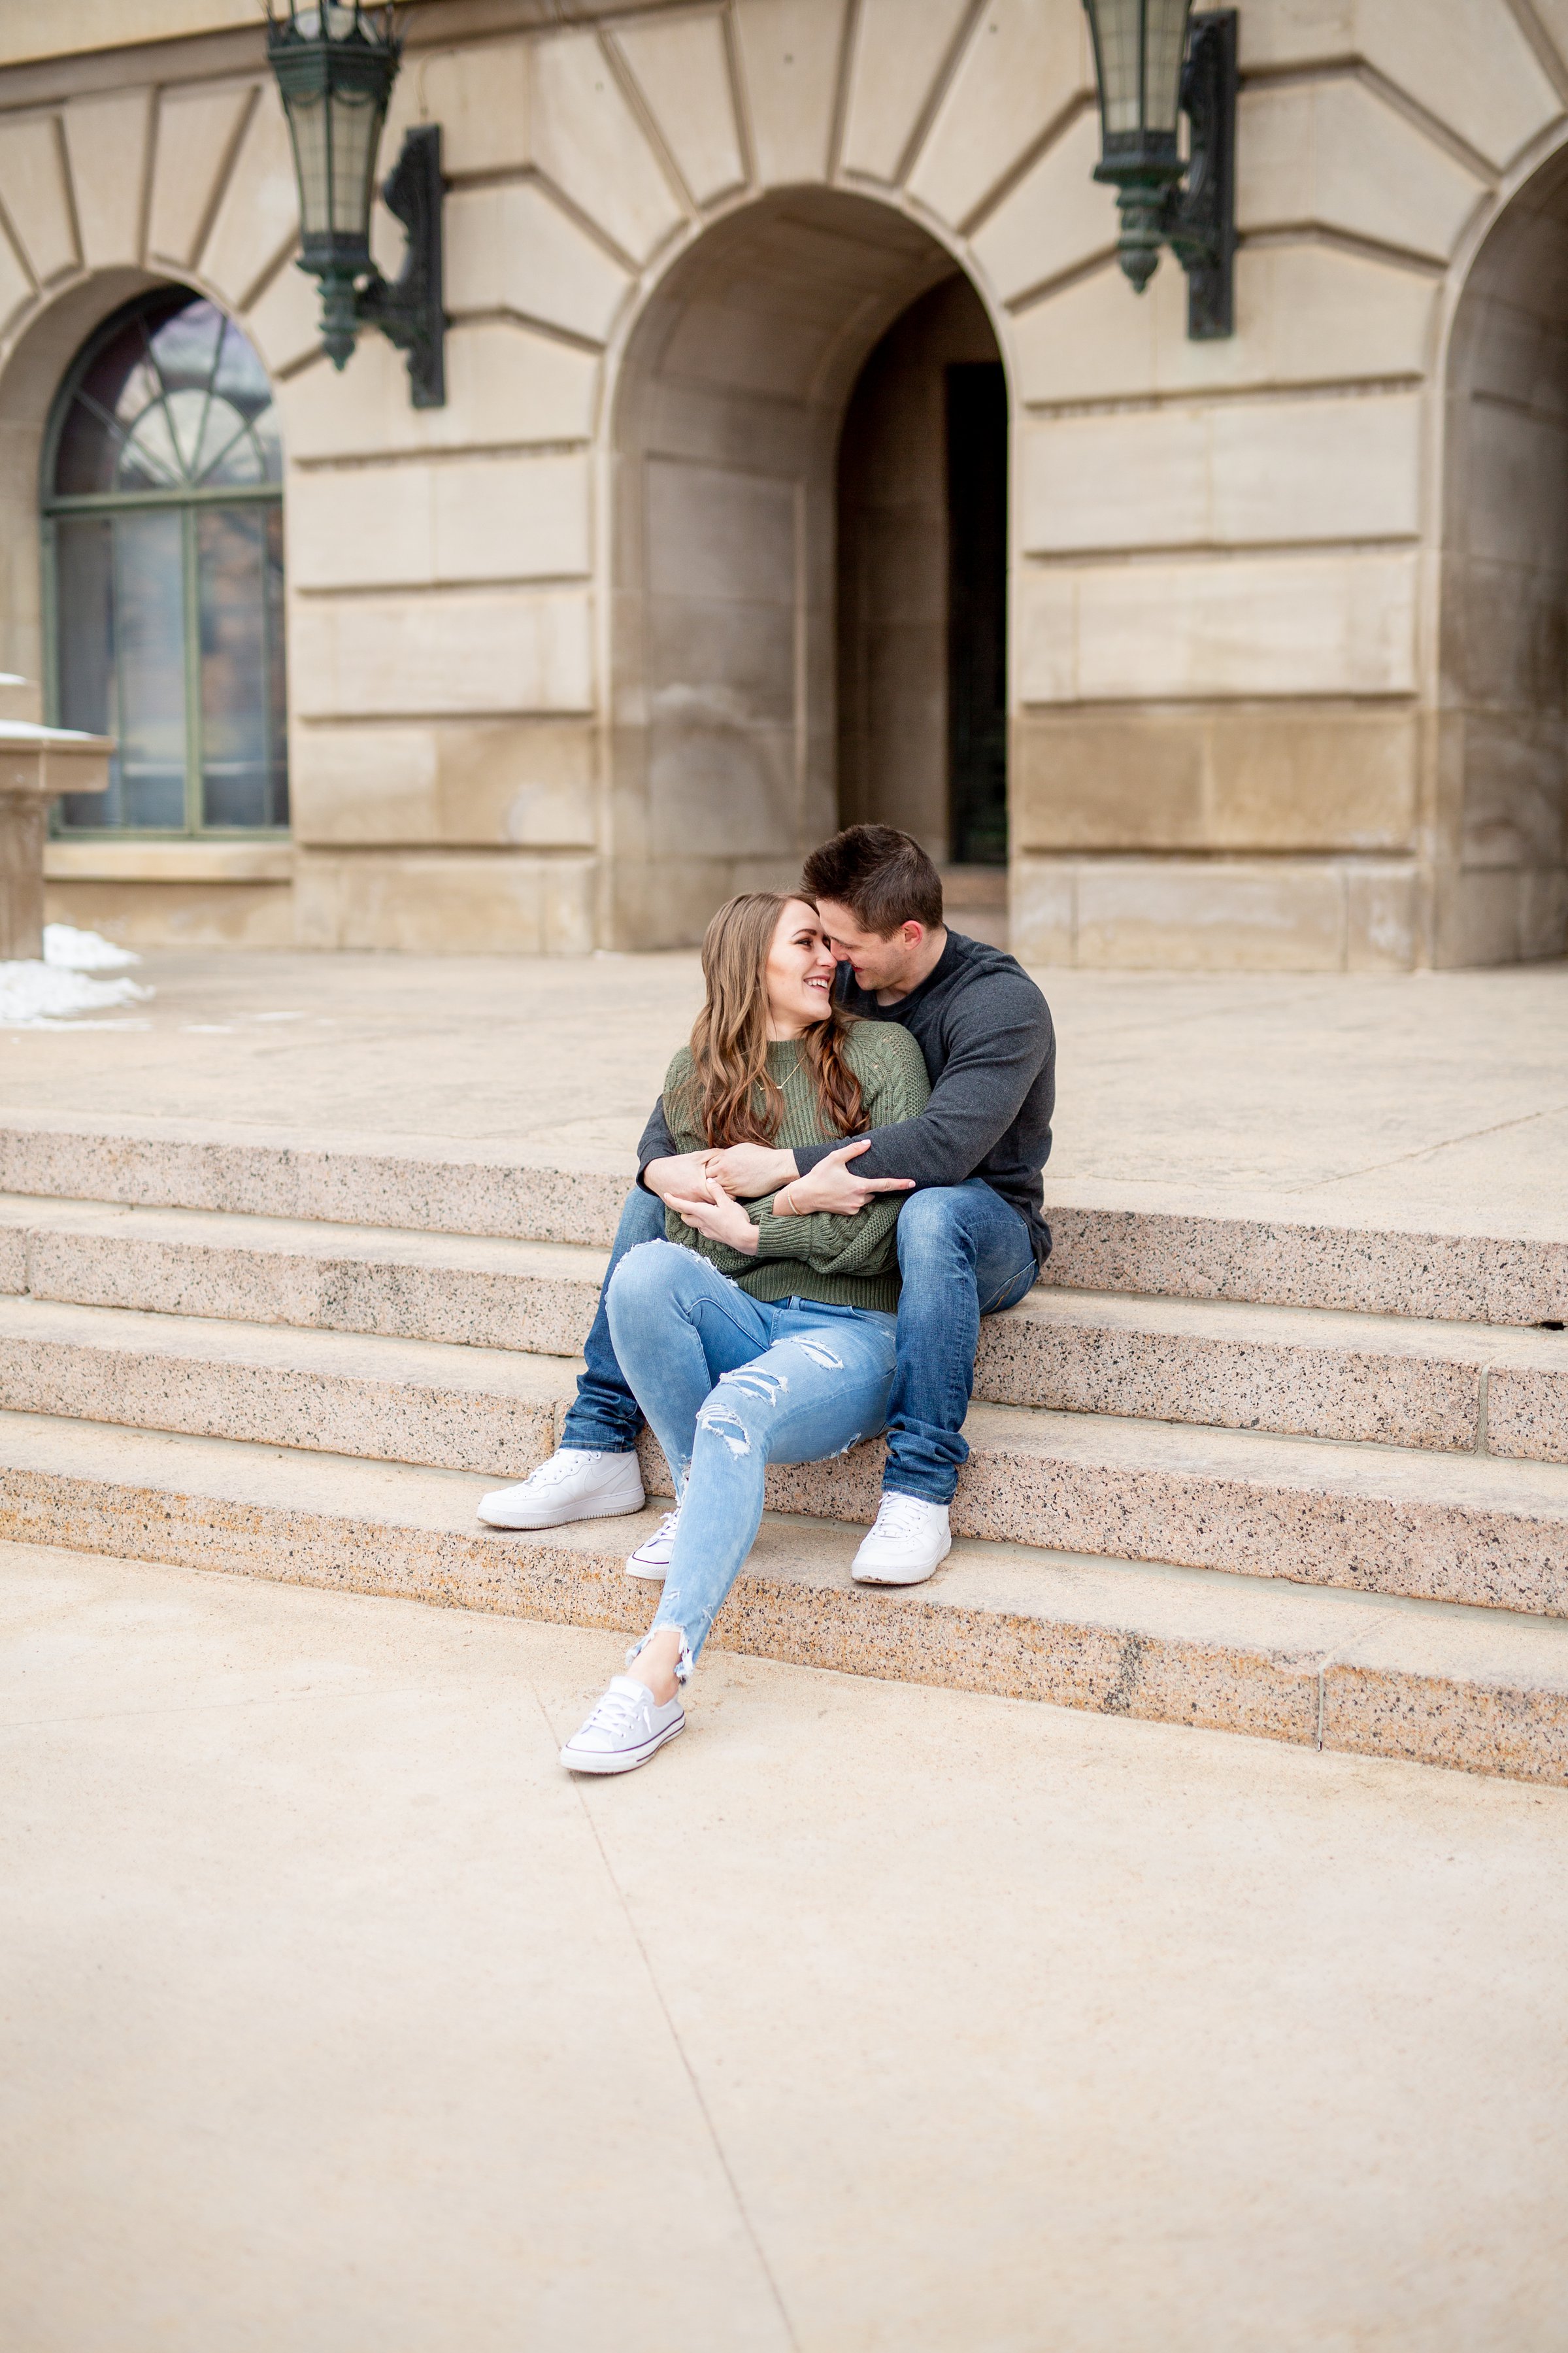 engaged couple snuggling on stairs in front of building with arched architecture for their fort collins engagement session